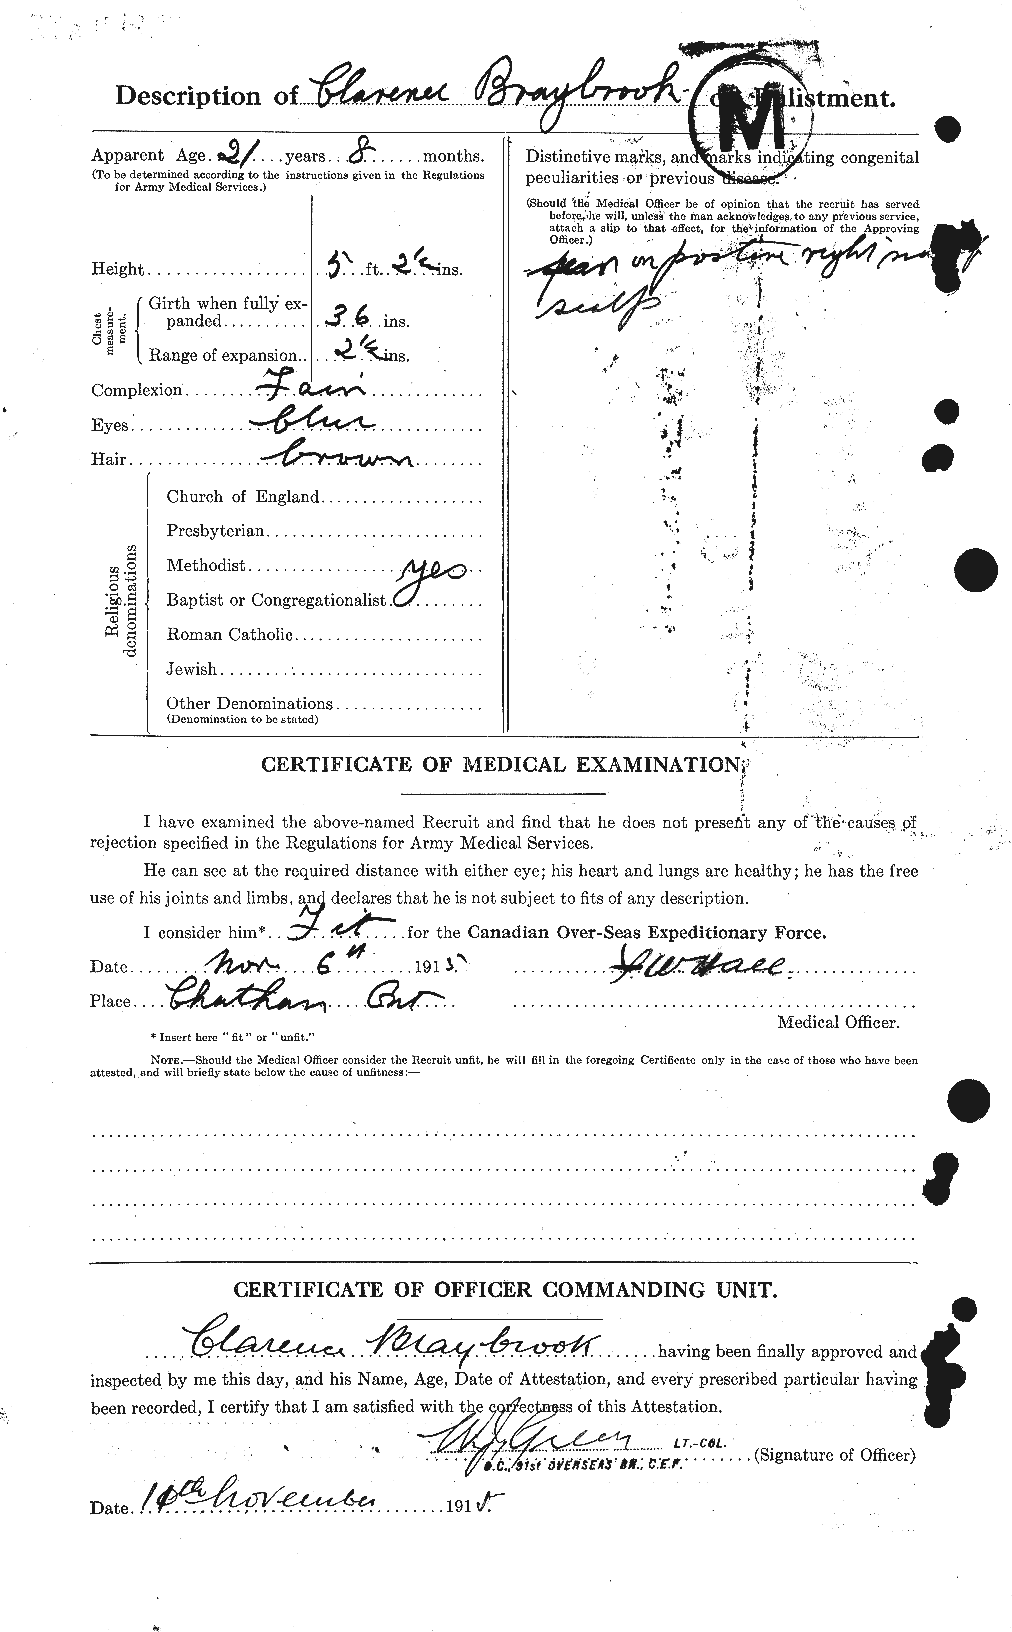 Personnel Records of the First World War - CEF 262354b